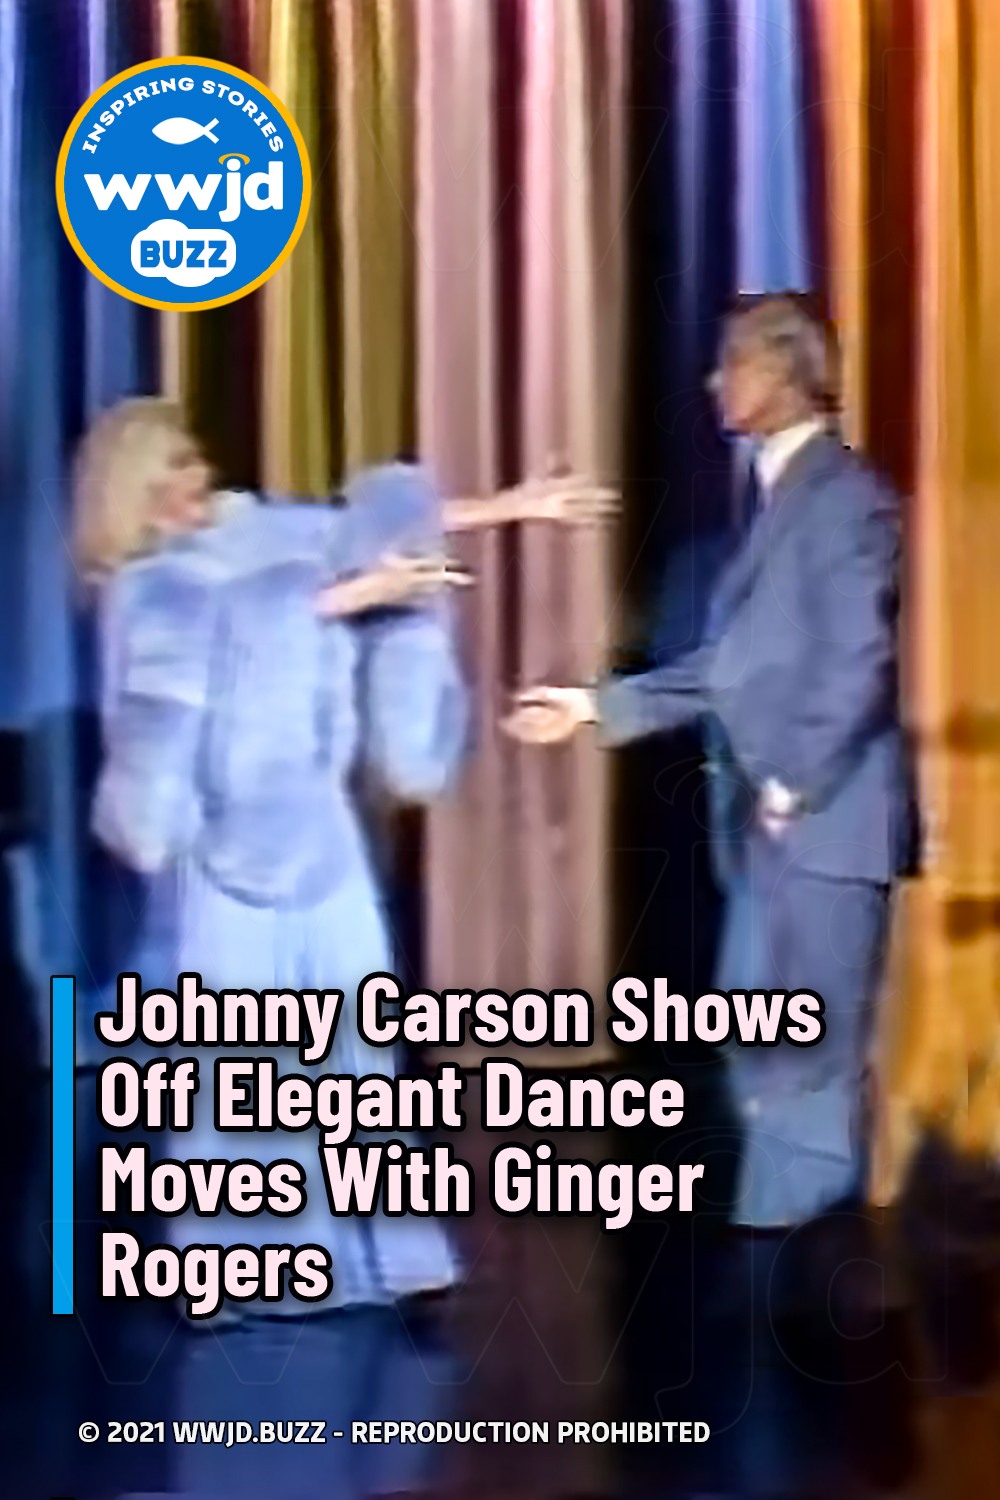 Johnny Carson Shows Off Elegant Dance Moves With Ginger Rogers